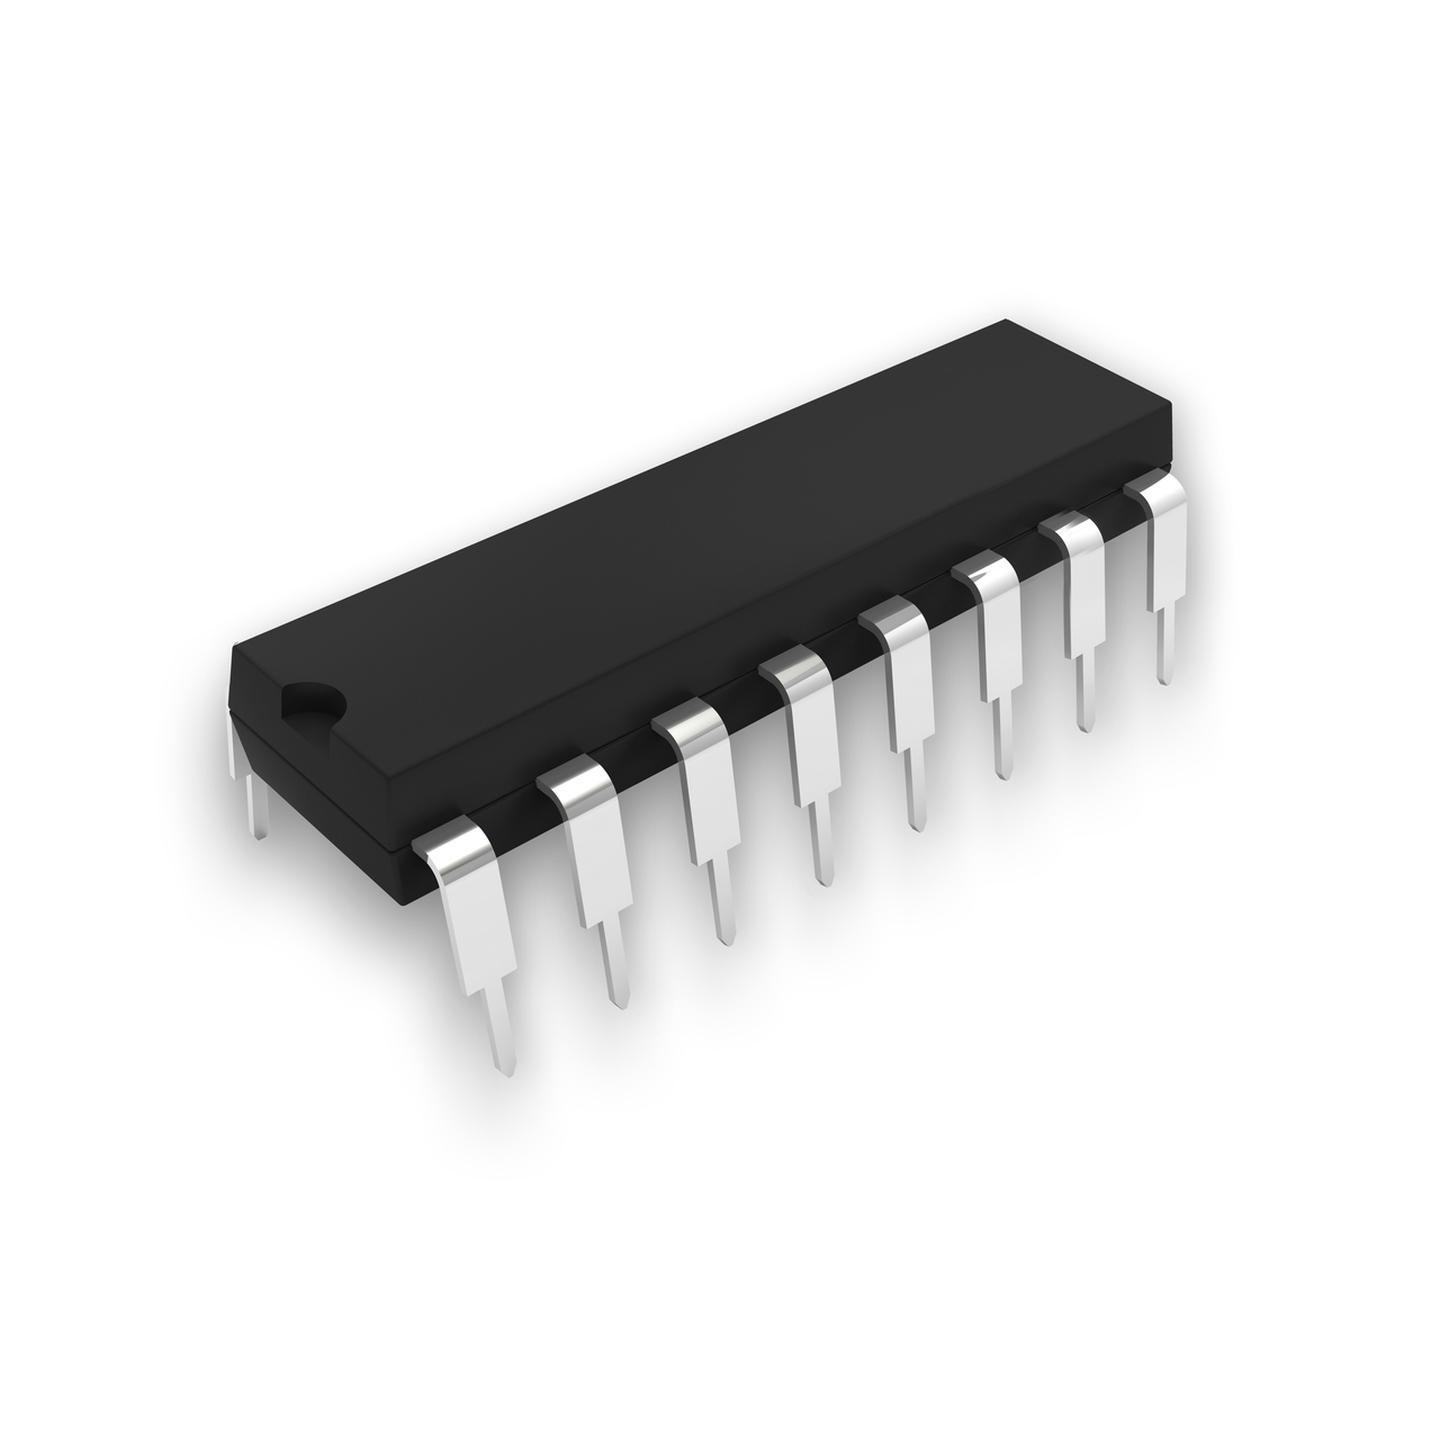 TDA1905 5W Amplifier IC with mute